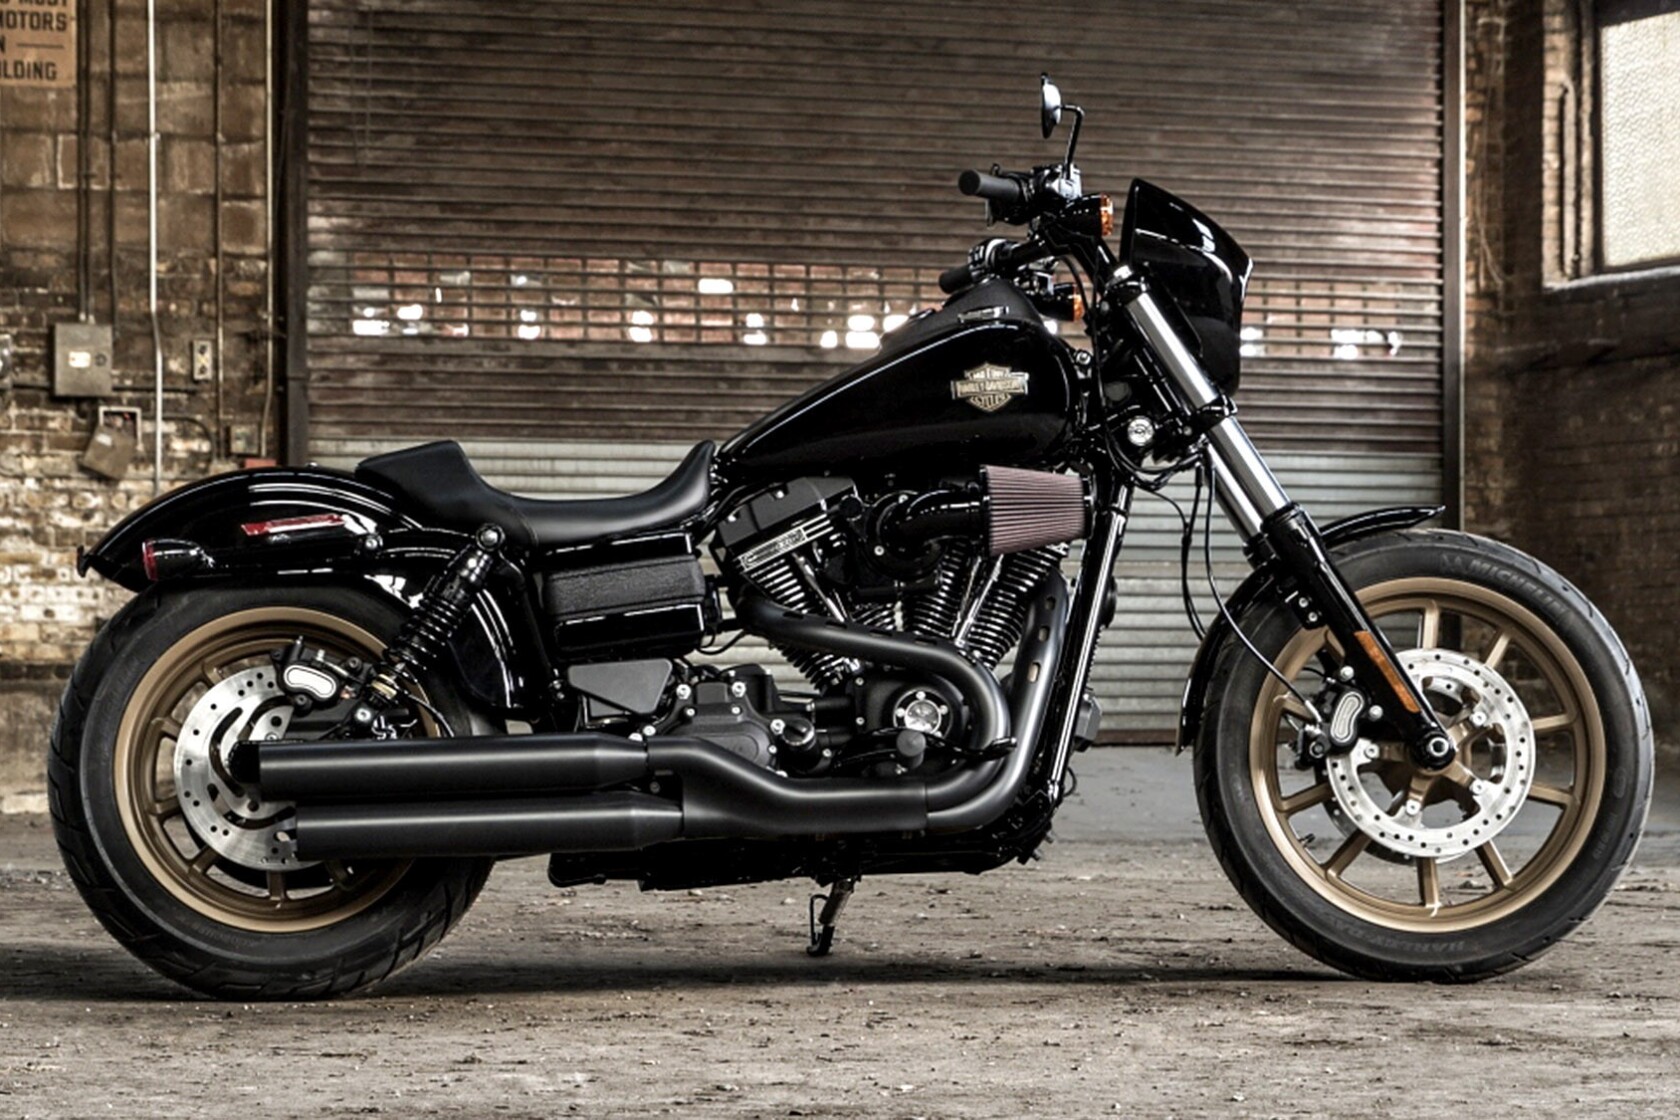  Harley  Davidson  adds two new models  to 2019 line Los 